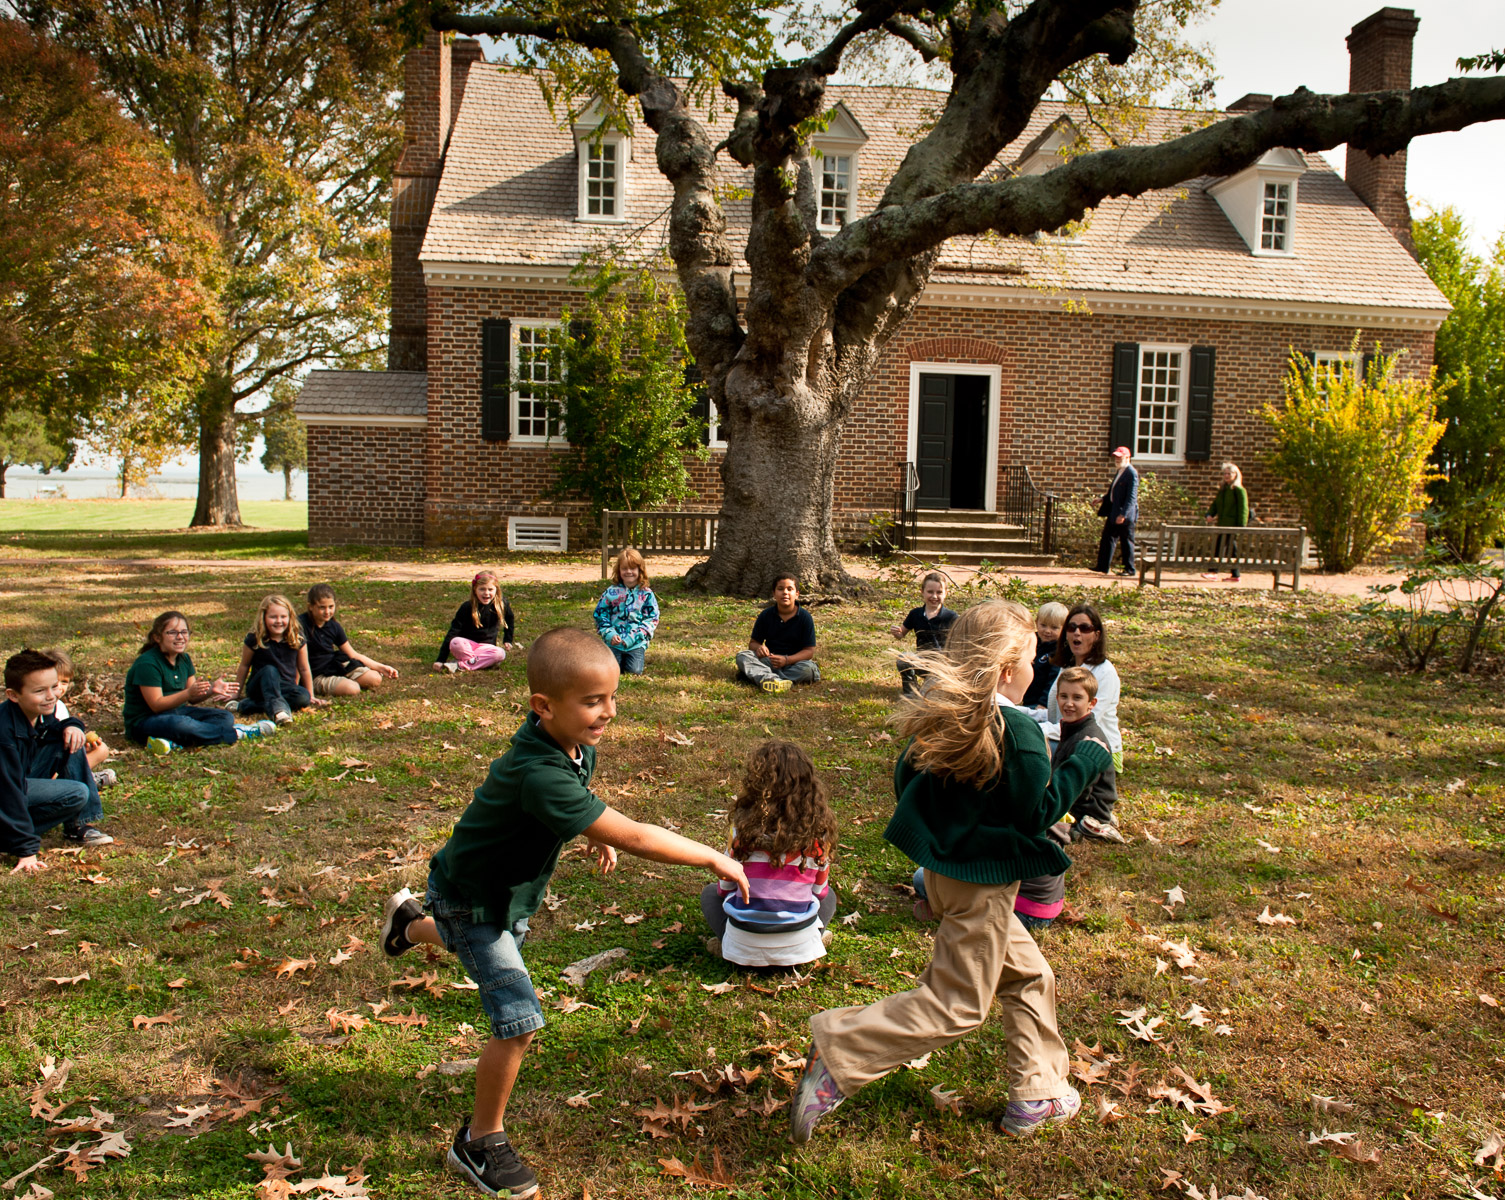 Children from Fredericksburg Christian School visit George Washington’s Birthplace National Monument in Colonial, Virginia. There is a 1930’s reproduction of the original house at the site which burned down in 1792. October 25, 2012. Vanessa Vick for The New York Times